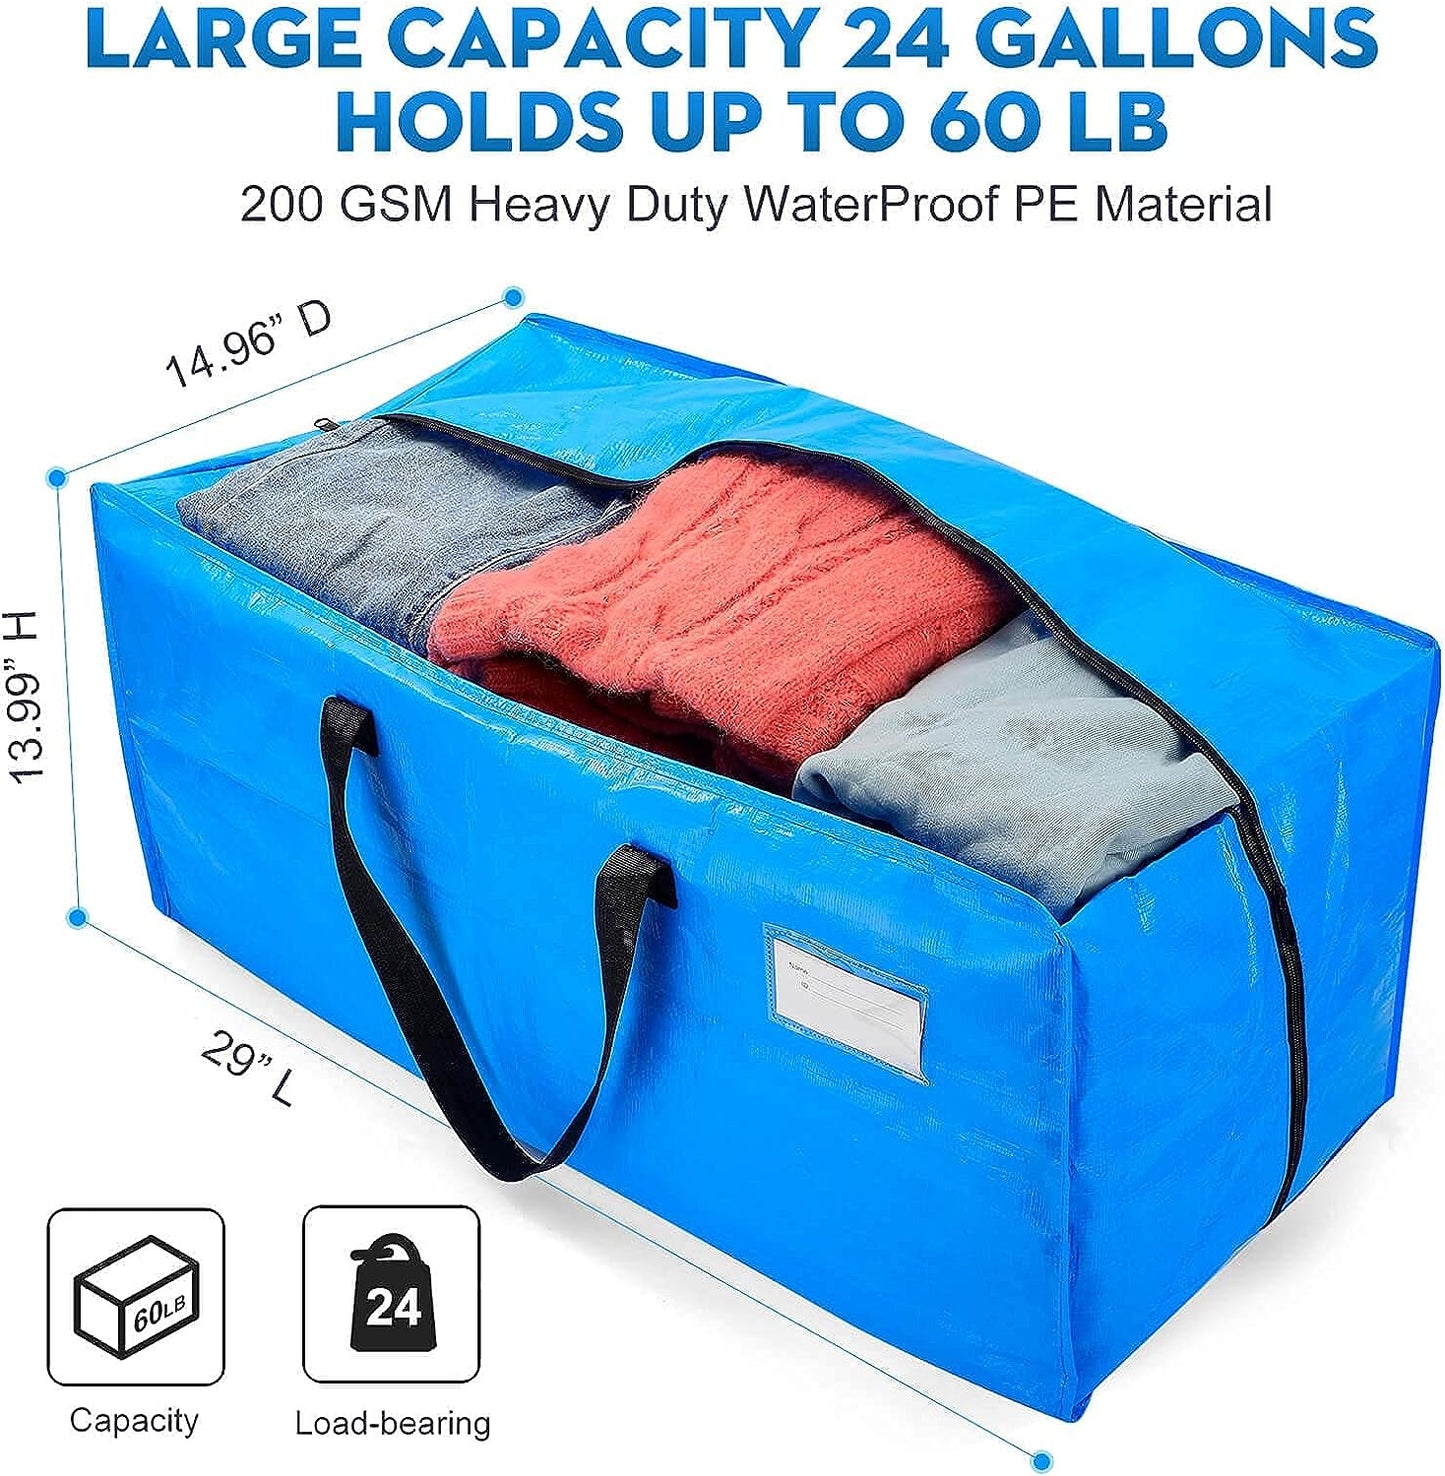 UniitesMarketplace.com™ AlexHome Moving Bags Heavy Duty,Extra Large Packing Bags for Moving,Reusable Plastic Moving Totes,Clothes Storage Containers,Moving Supplies Bins,Compatible...$31.91